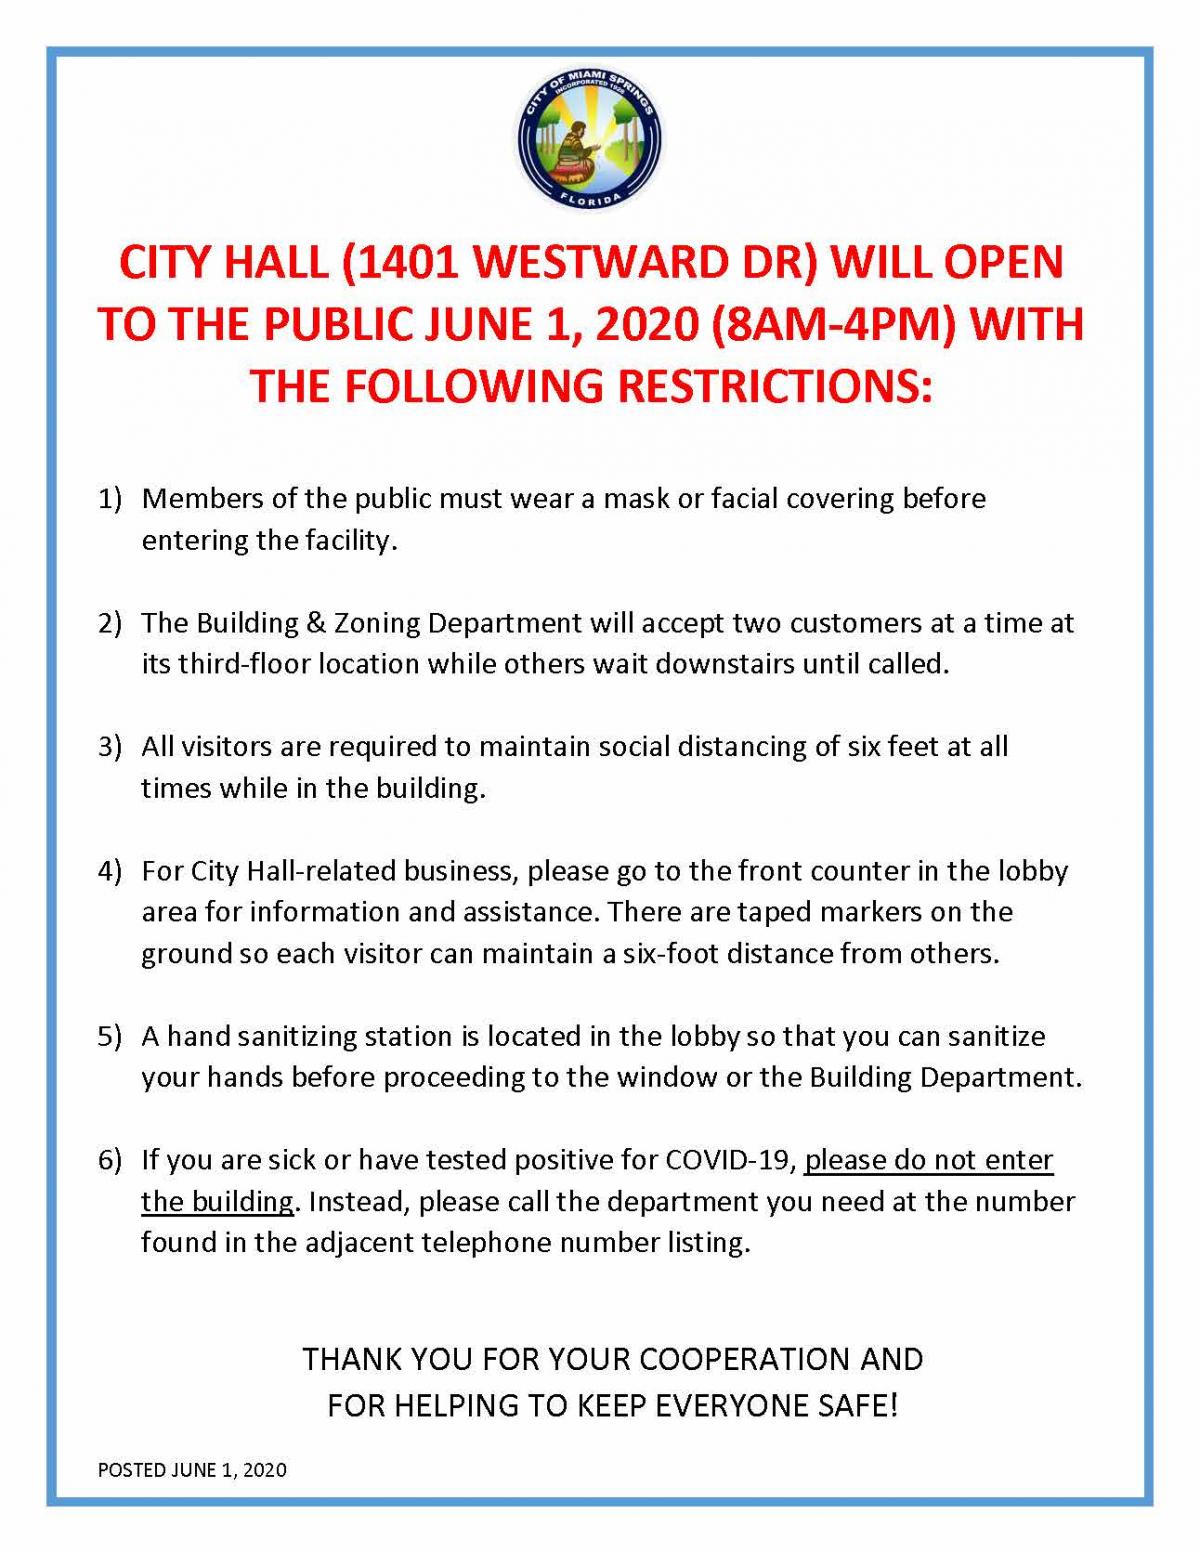 City Hall Offices at 1401 Westward Drive will Open to the Public June 1, 8AM-4PM With Restrictions, Limits, and Facial Coverings